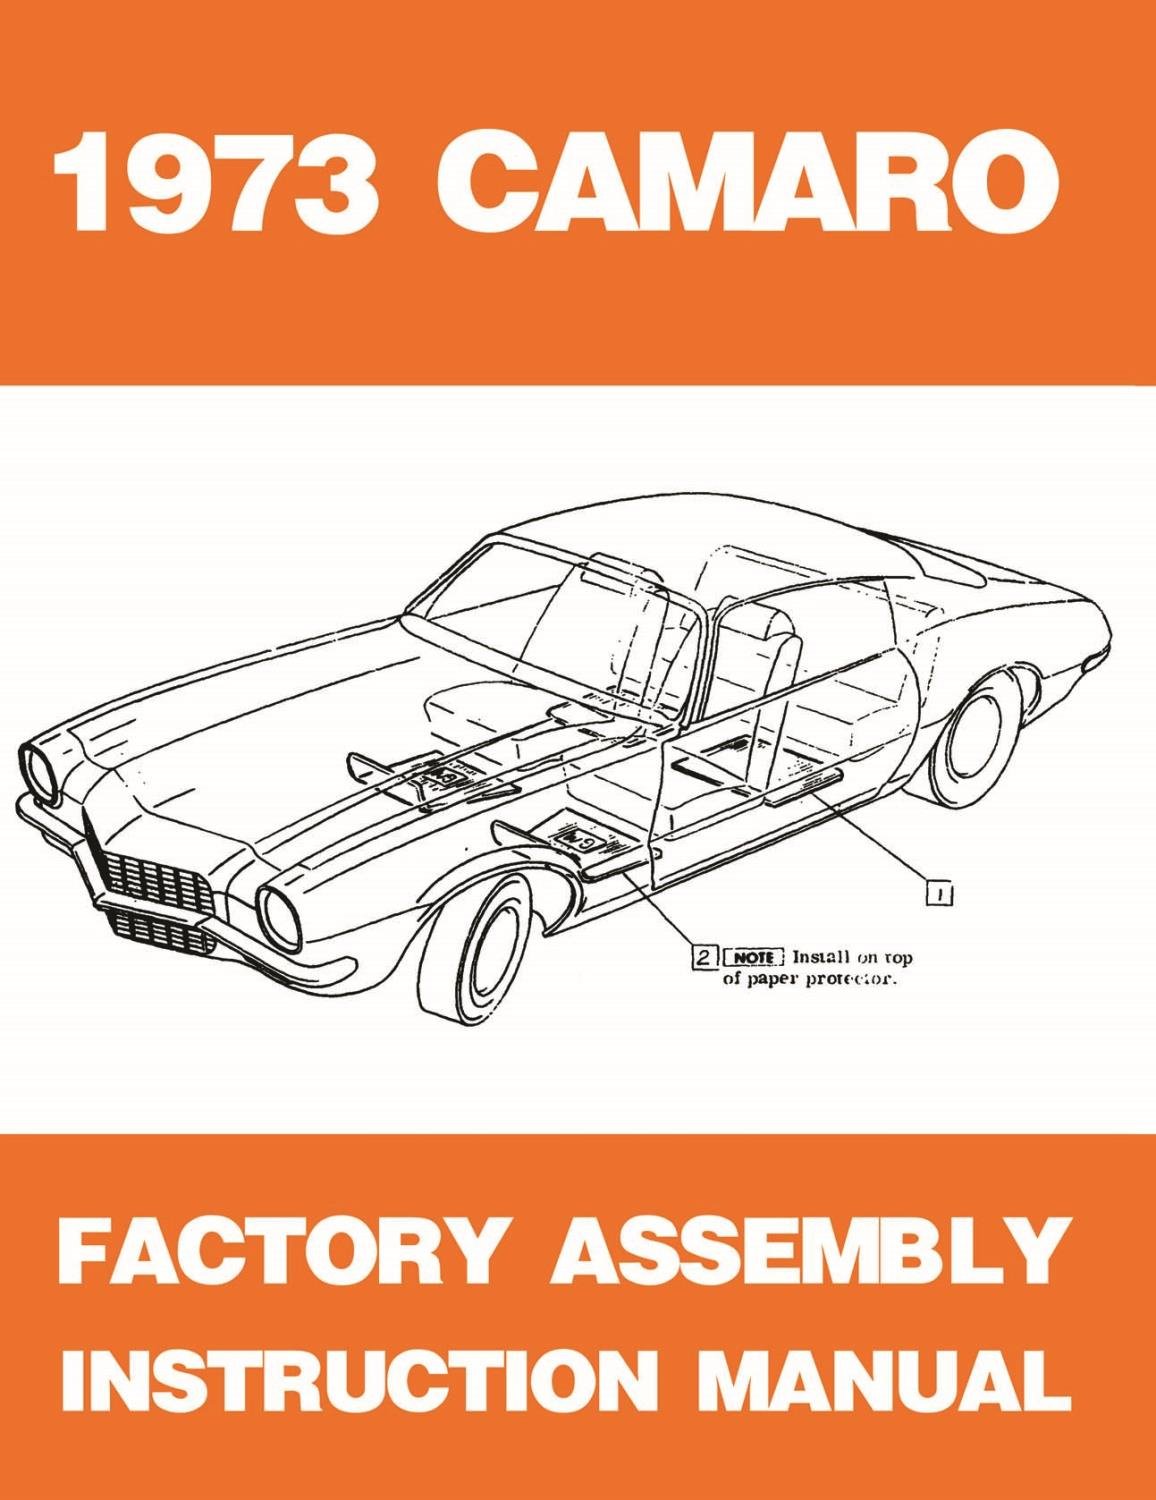 Factory Assembly Instruction Manual for 1973 Chevrolet Camaro